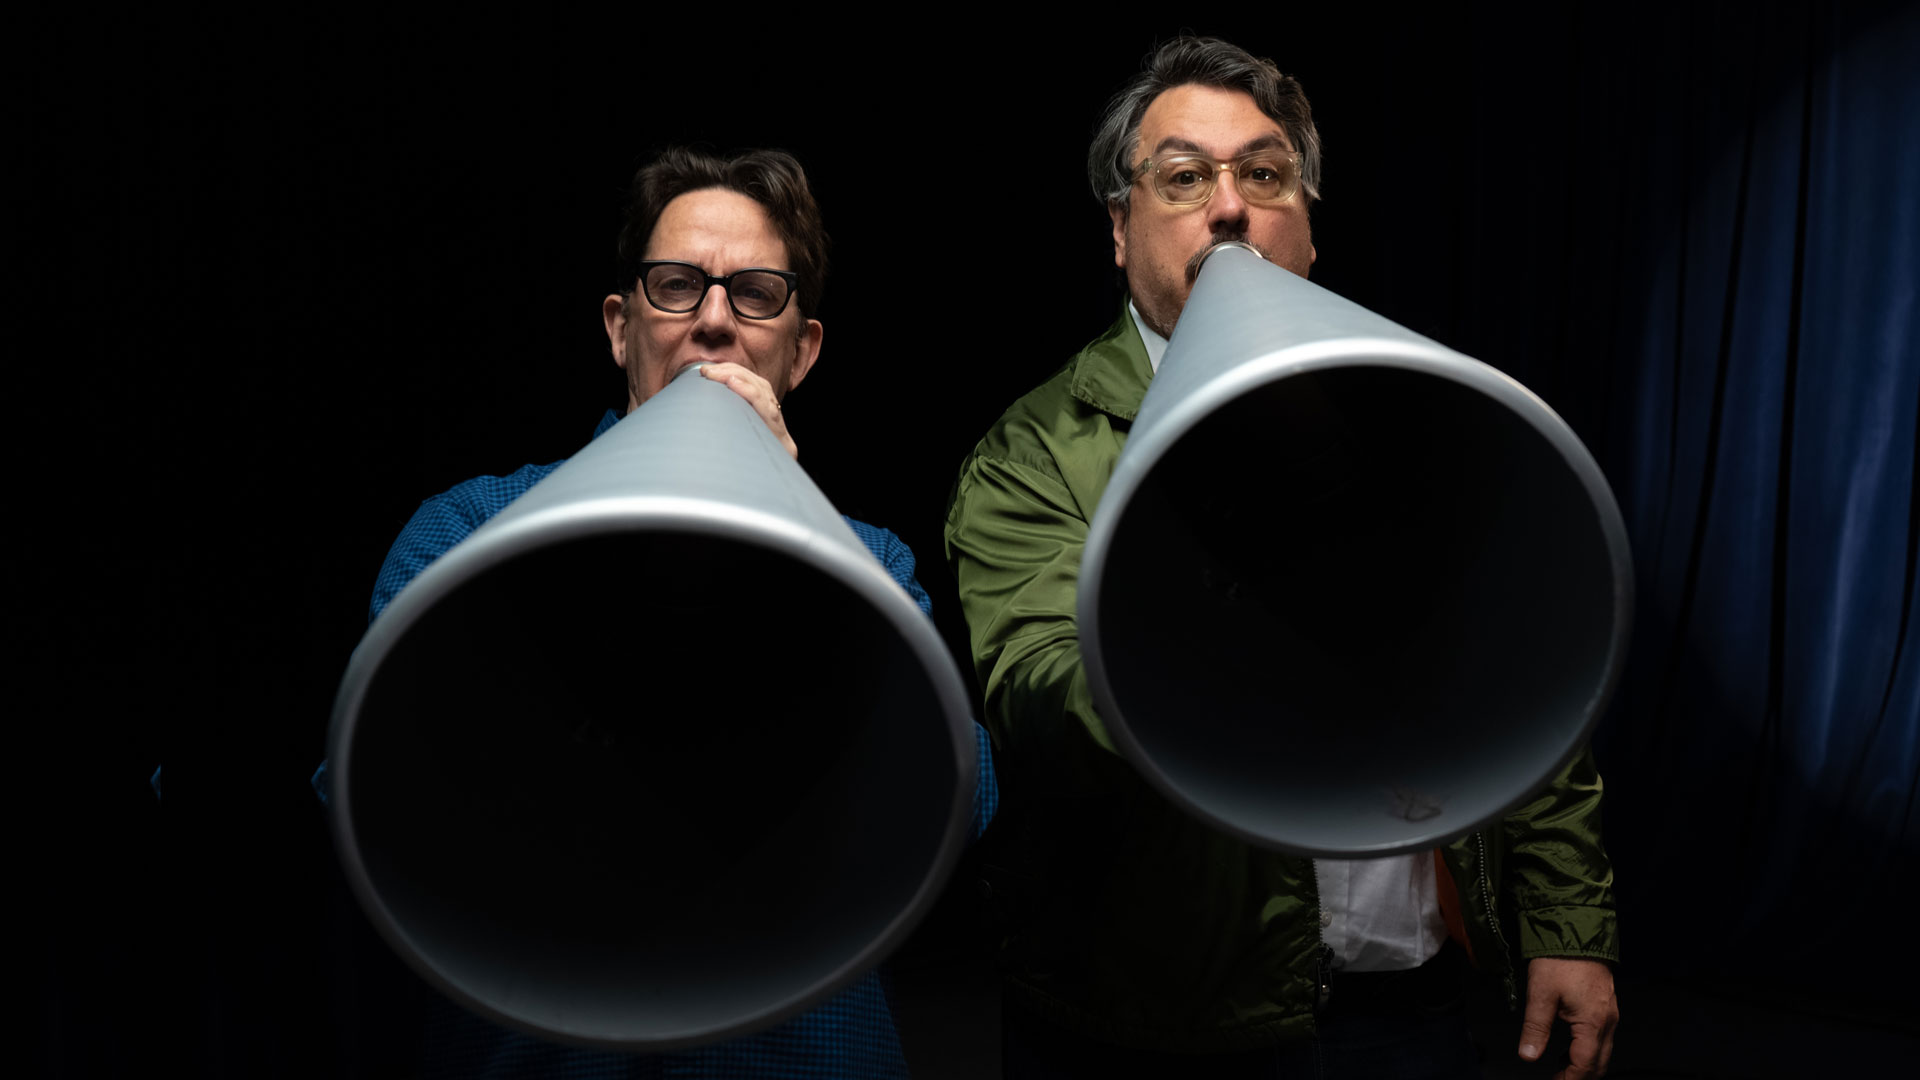 They Might Be Giants (L-R John Linnell and John Flansburgh) are coming to the UK to celebrate their album Flood. Photo: Sam Graff